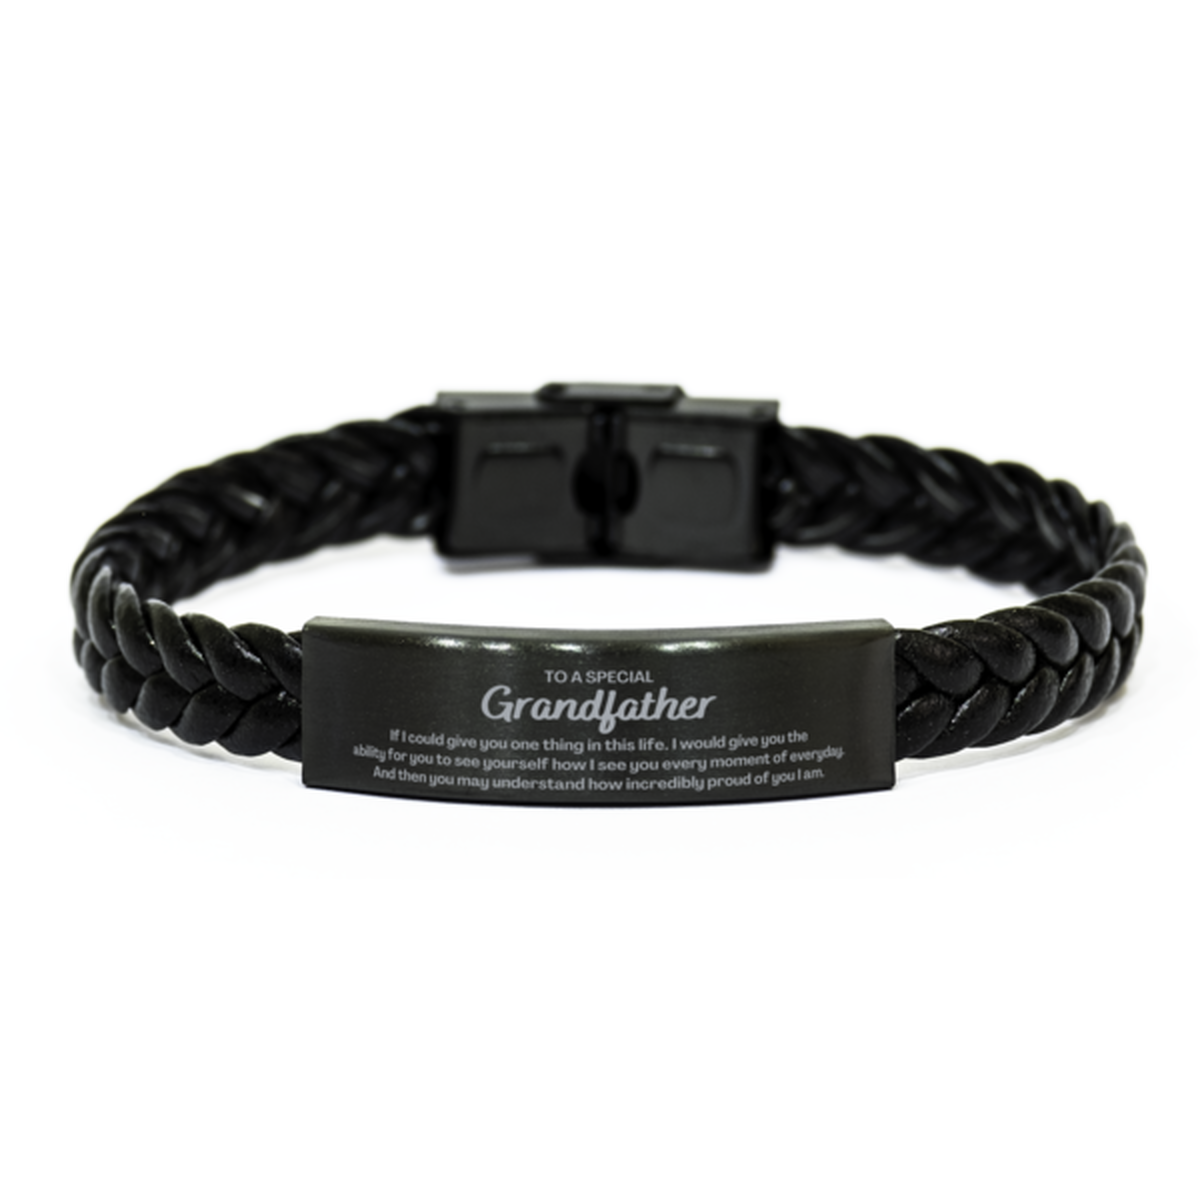 To My Grandfather Braided Leather Bracelet, Gifts For Grandfather Engraved, Inspirational Gifts for Christmas Birthday, Epic Gifts for Grandfather To A Special Grandfather how incredibly proud of you I am